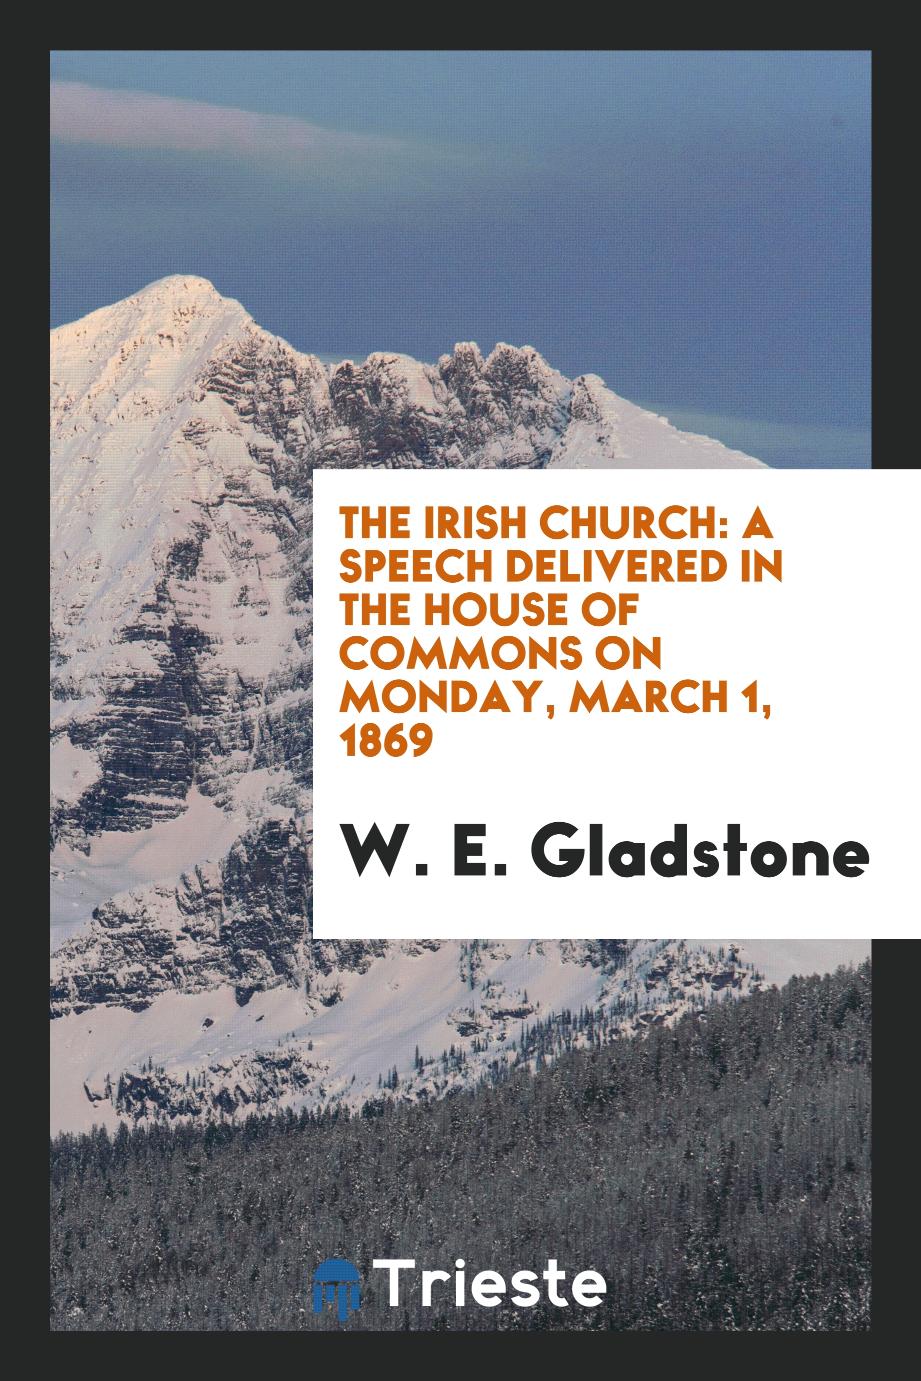 The Irish Church: A Speech Delivered in the House of Commons on Monday, march 1, 1869